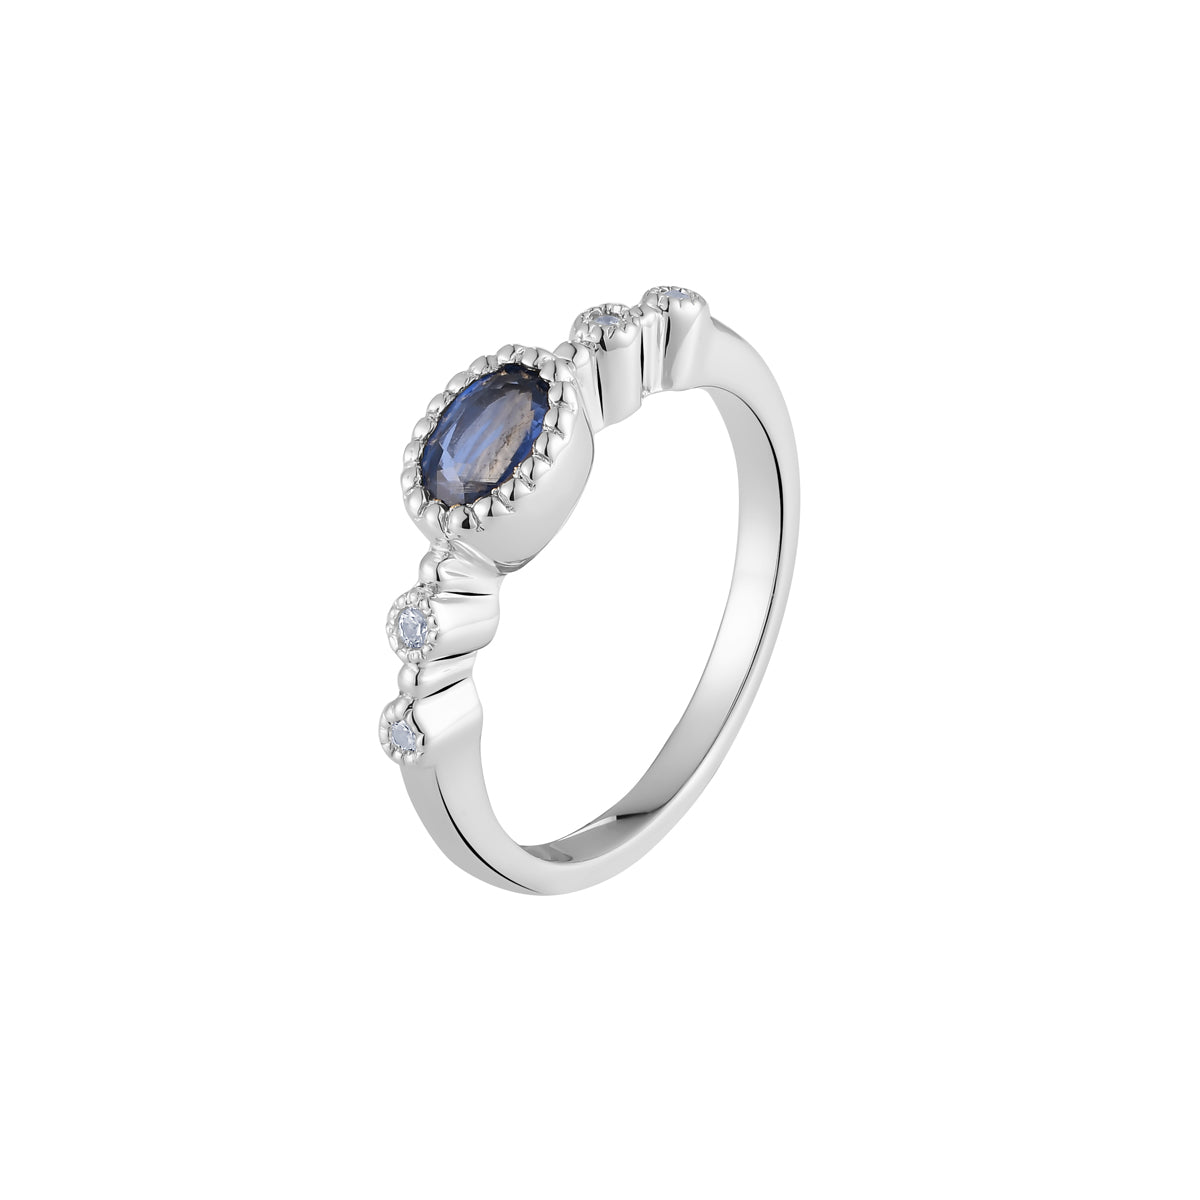 Kyanite and Zircon Silver Ring